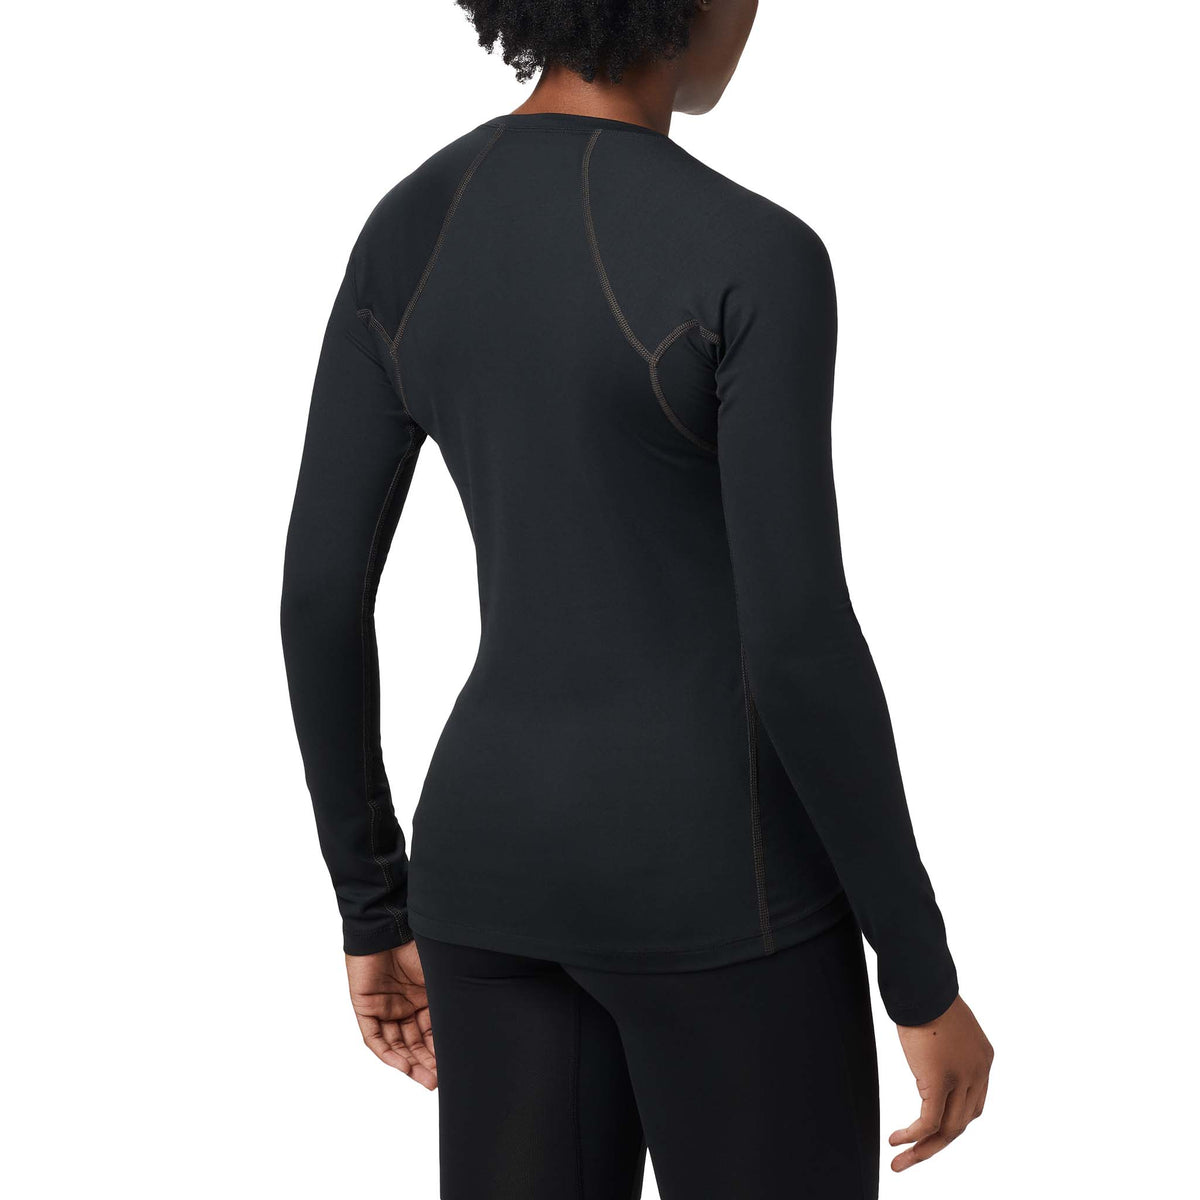 Columbia Heavyweight Stretch baselayer thermique noir femme dos